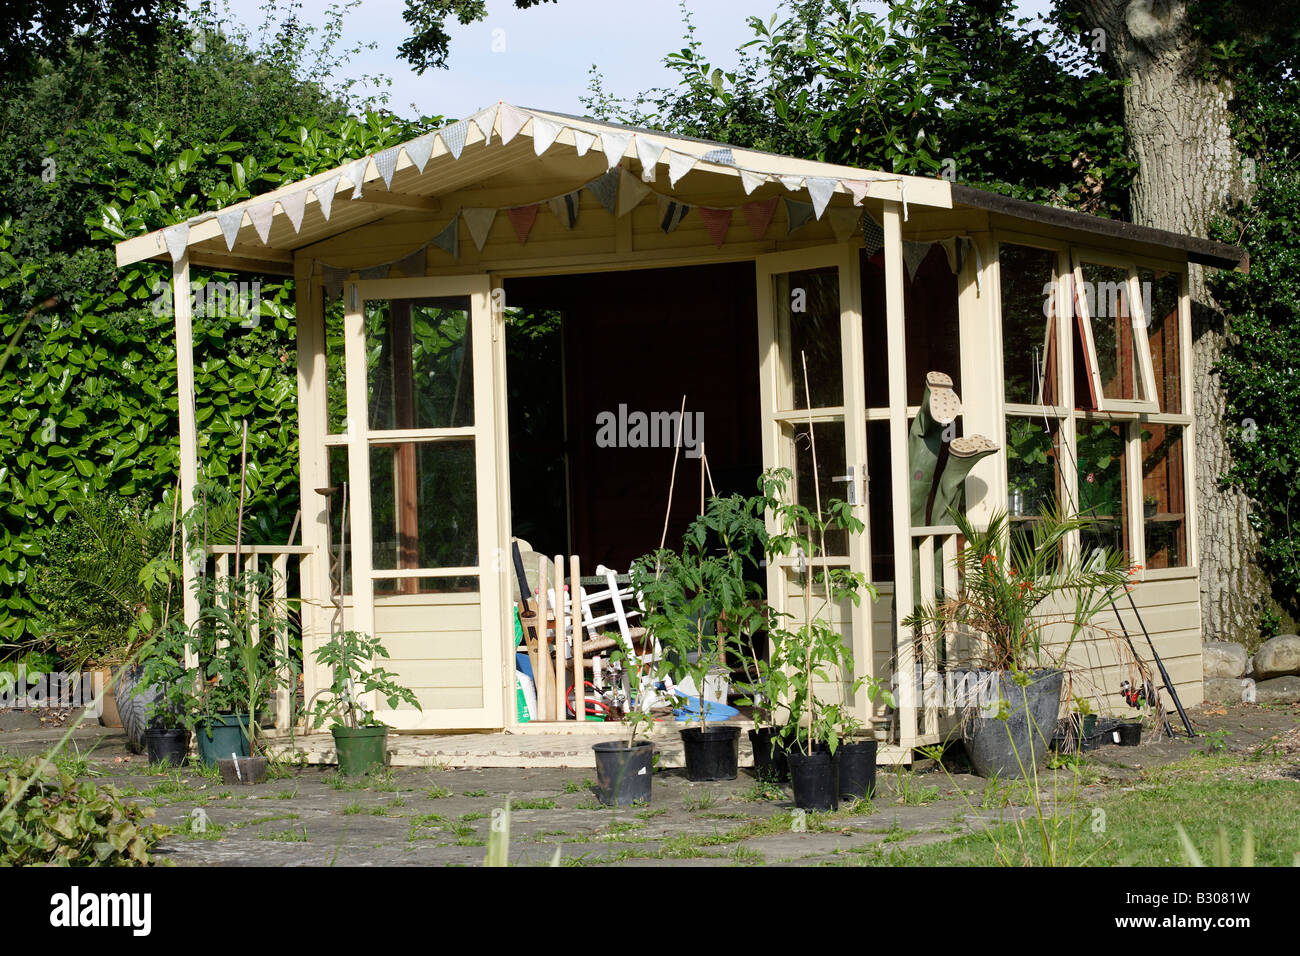 Garden summer house or shed Stock Photo